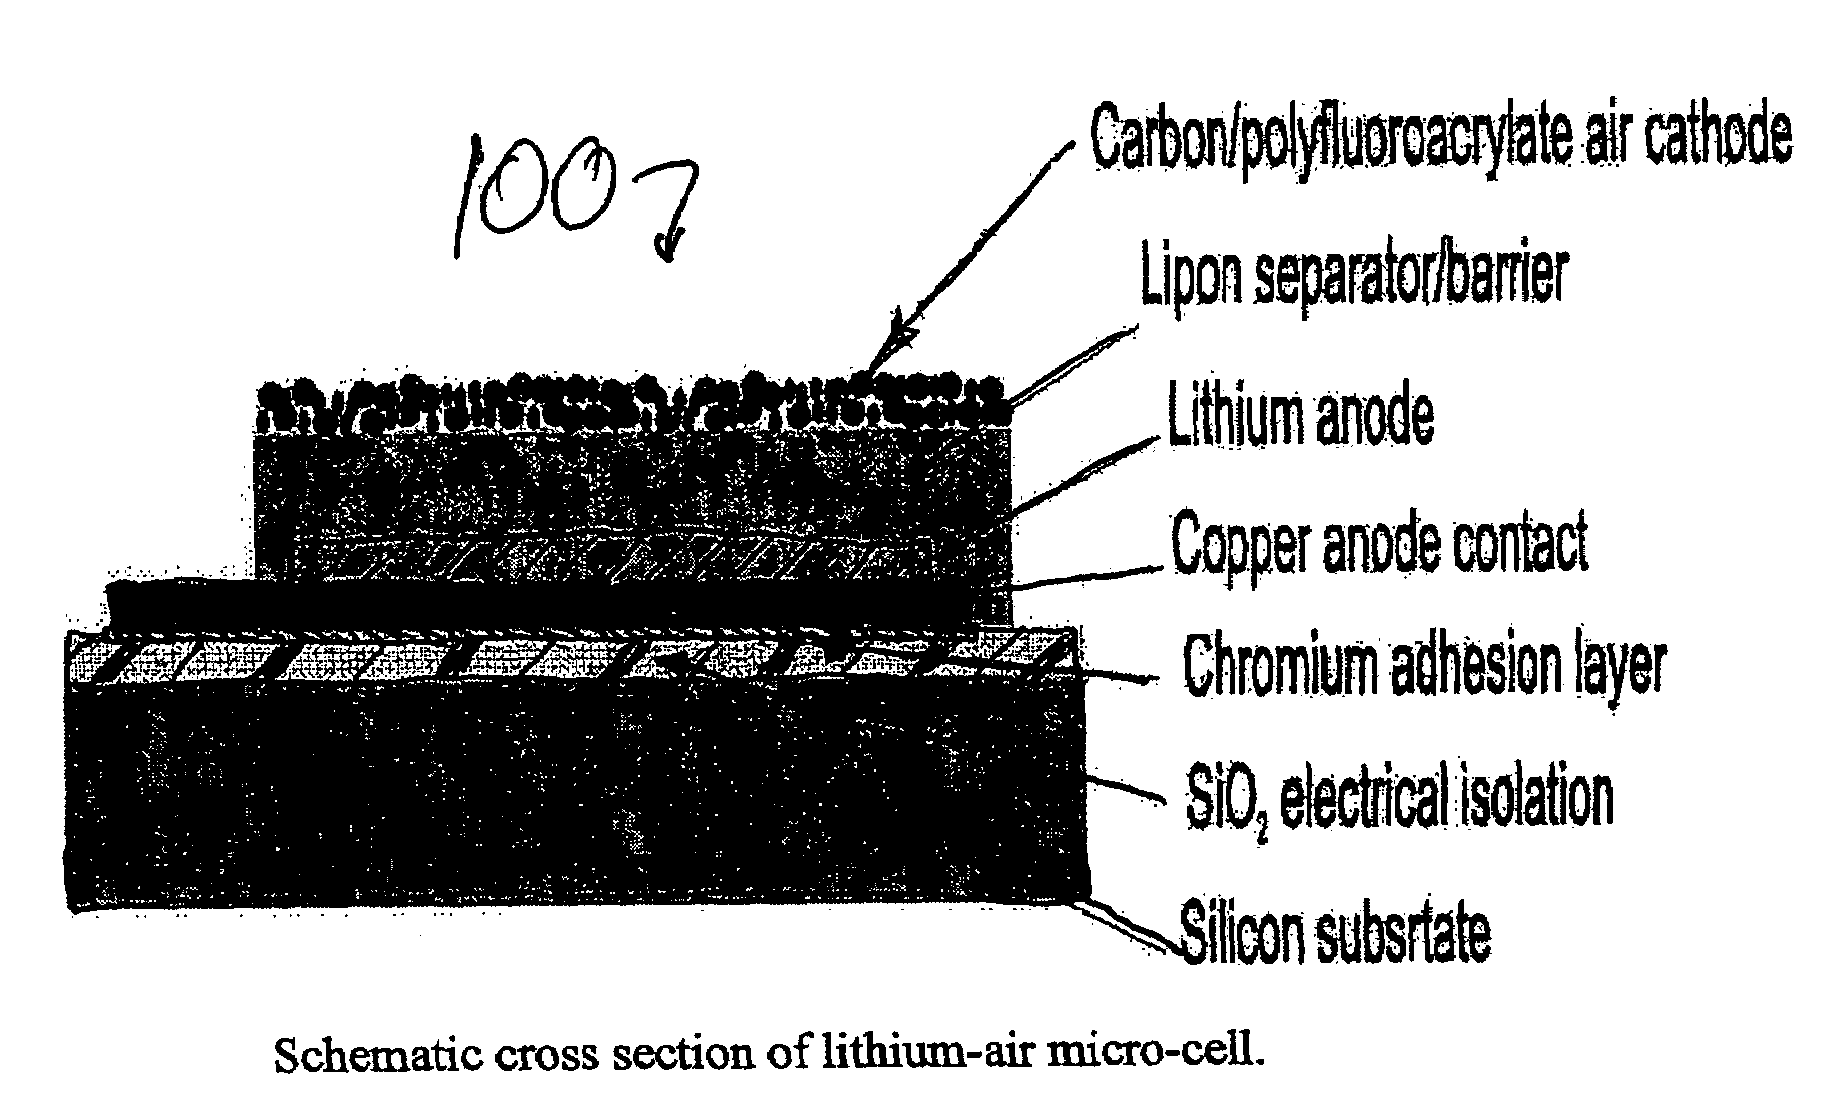 Lithium/air batteries with LiPON as separator and protective barrier and method